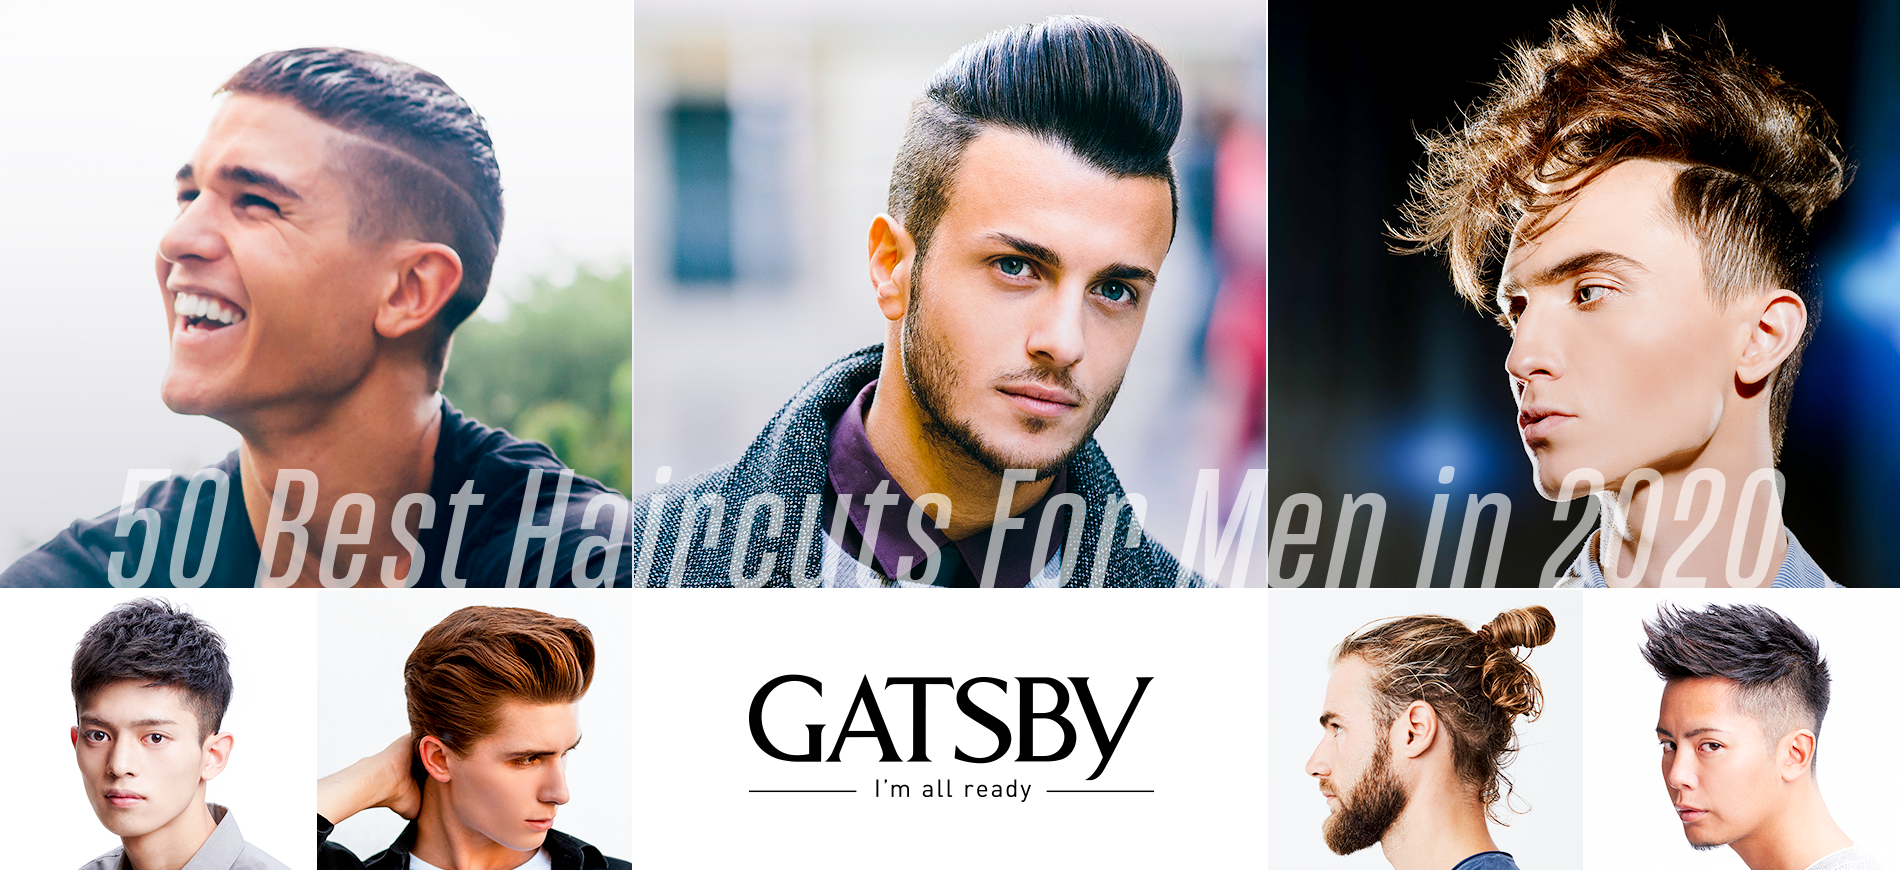 50 Best Haircuts For Men in 2020